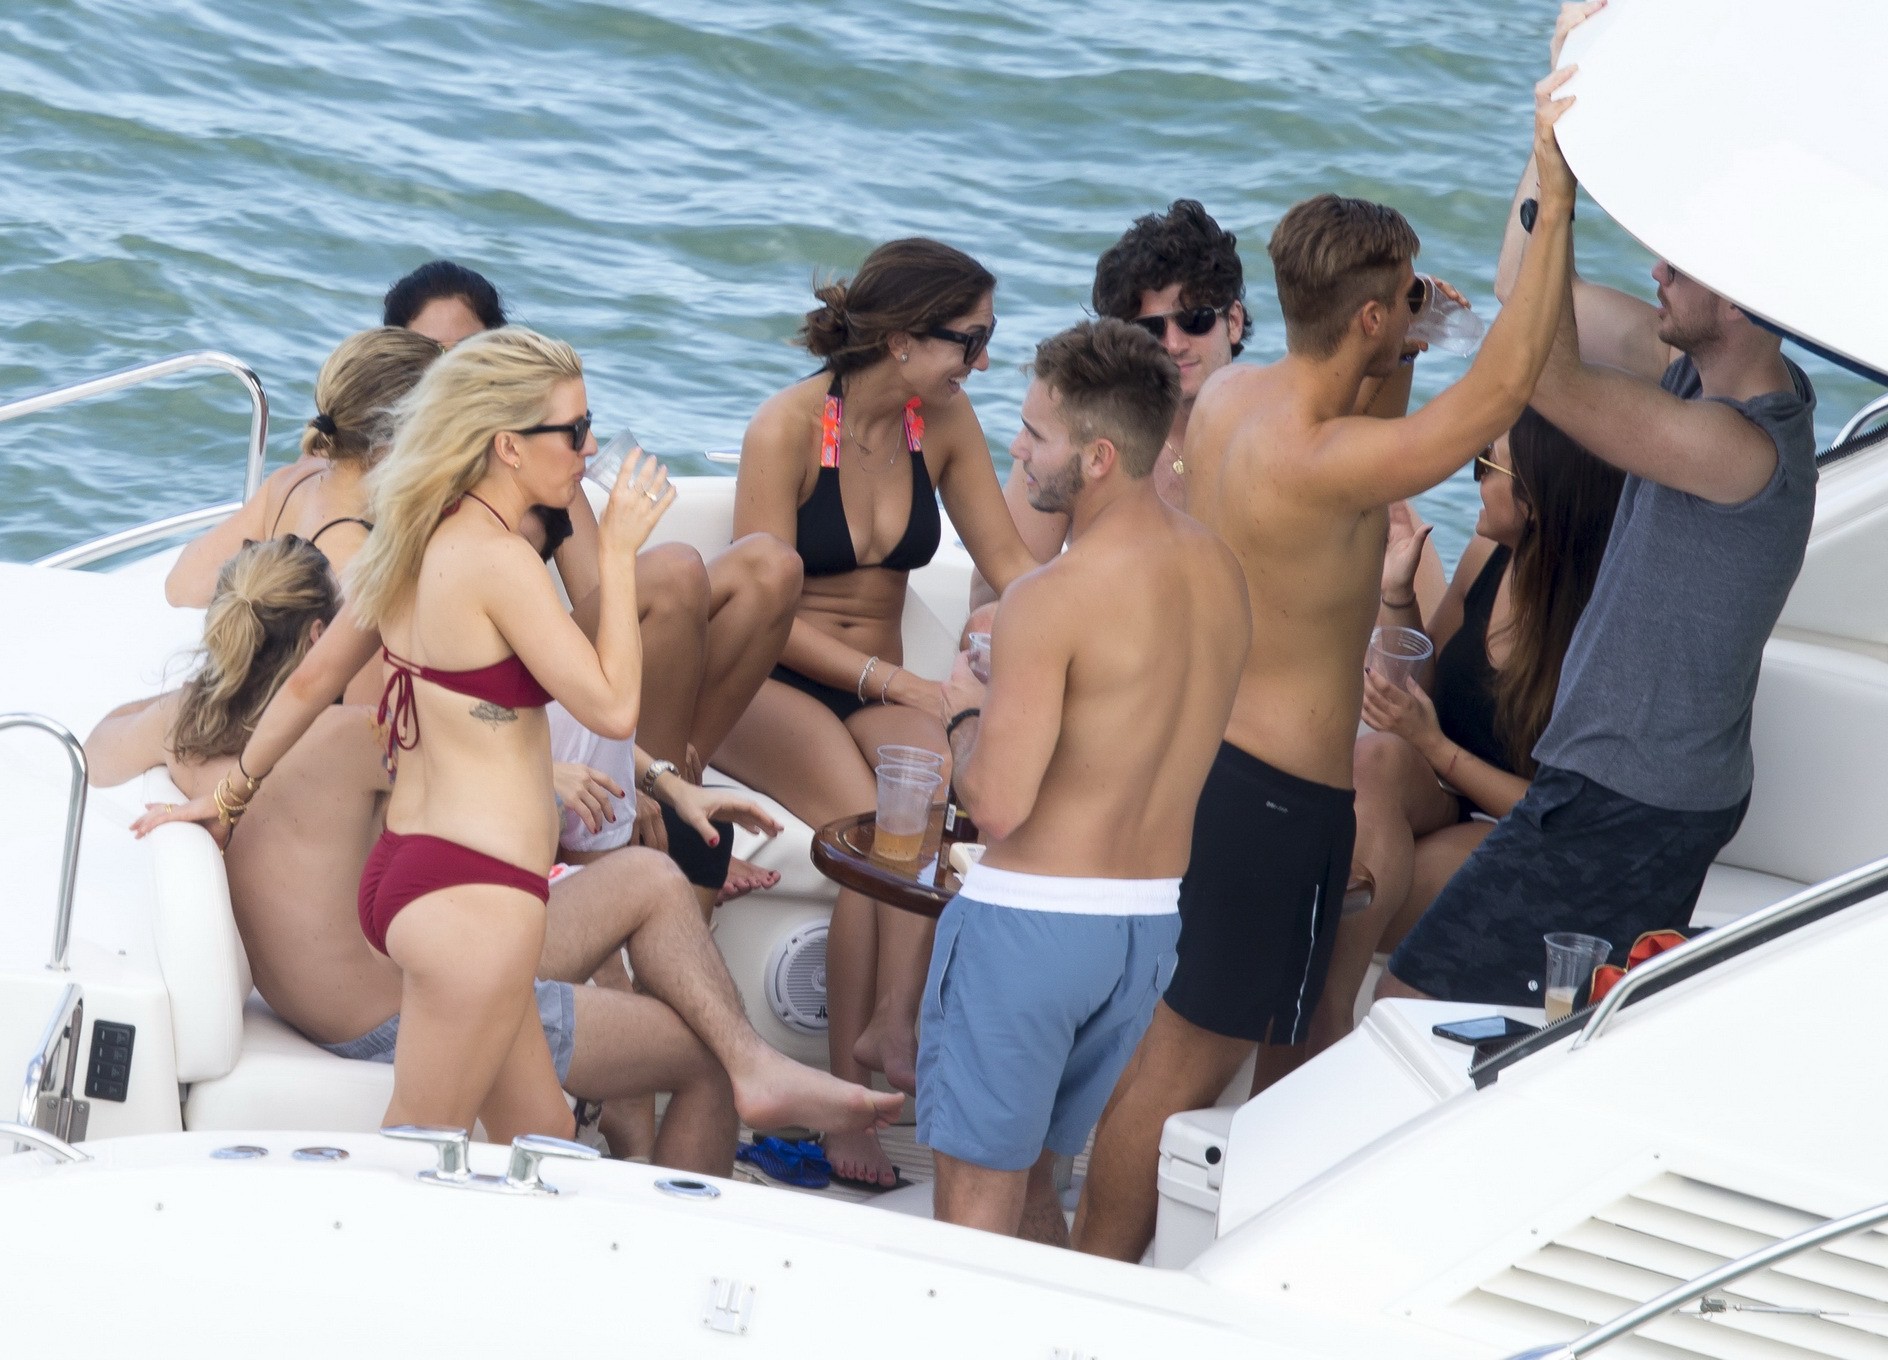 Ellie Goulding showing her ass in skimpy cherry colored bikini at the boat in Mi #75177138